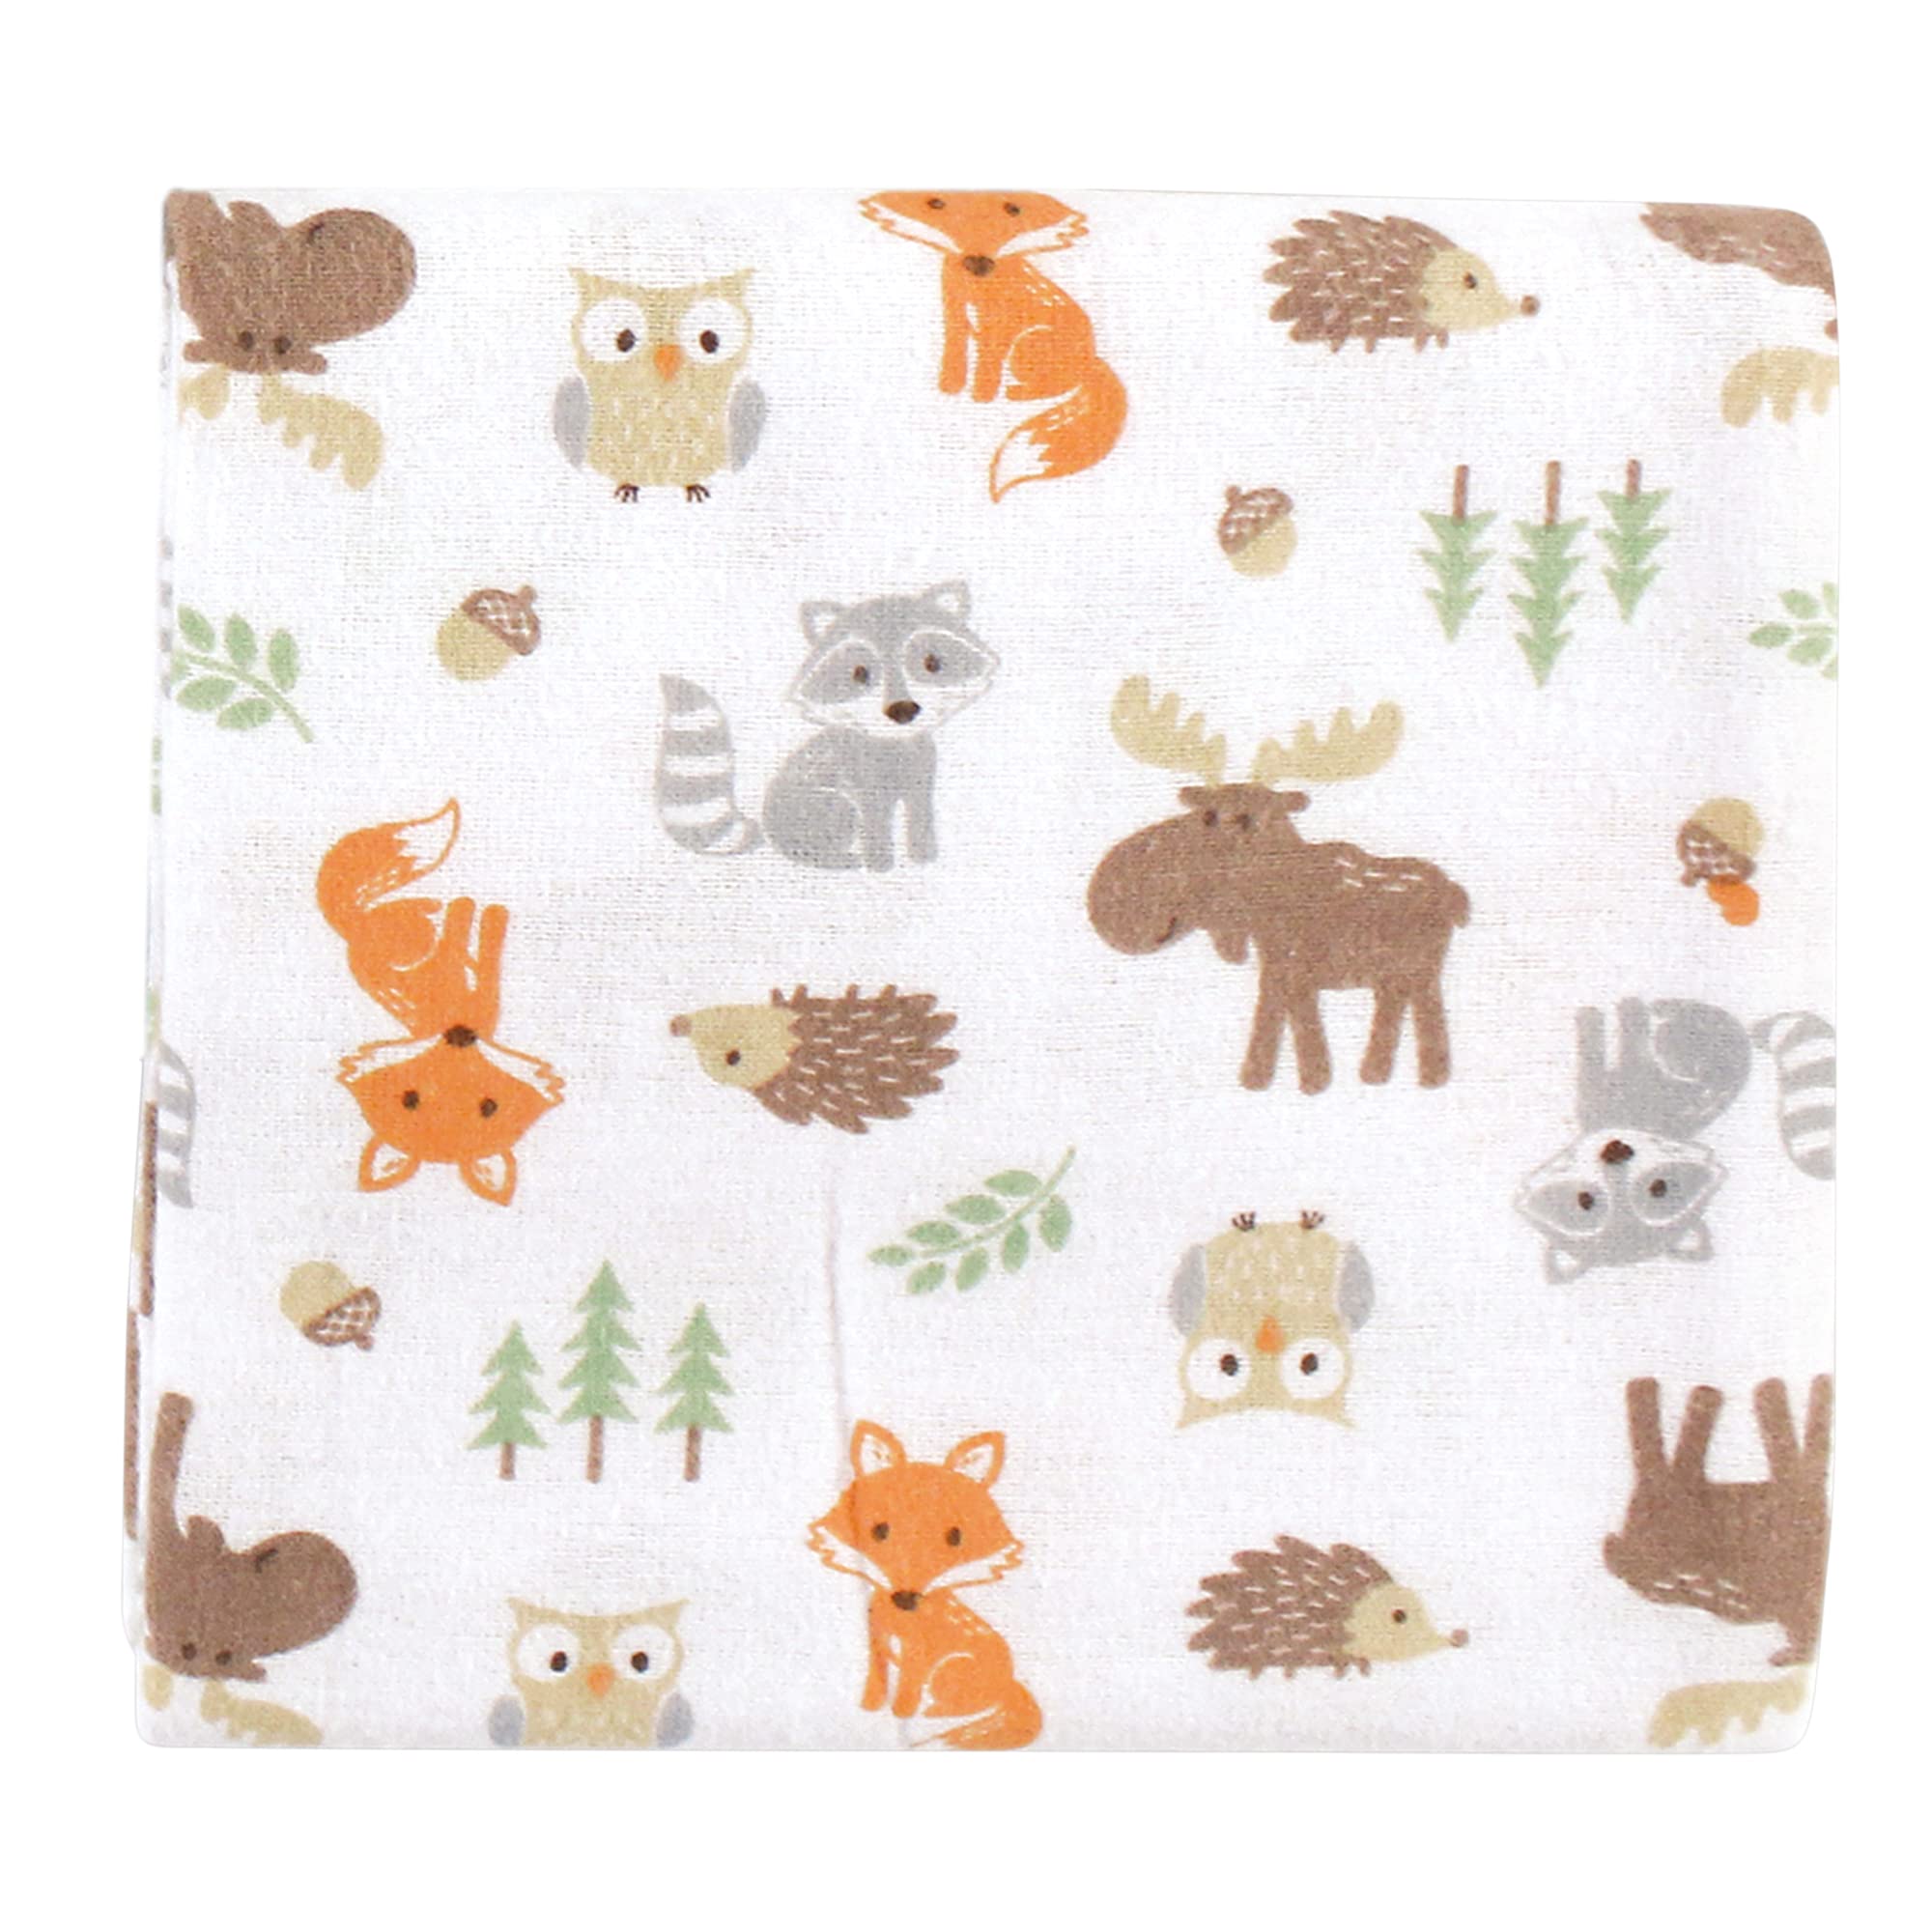 Hudson Baby Unisex Baby Cotton Flannel Receiving Blankets Bundle, Woodland, One Size